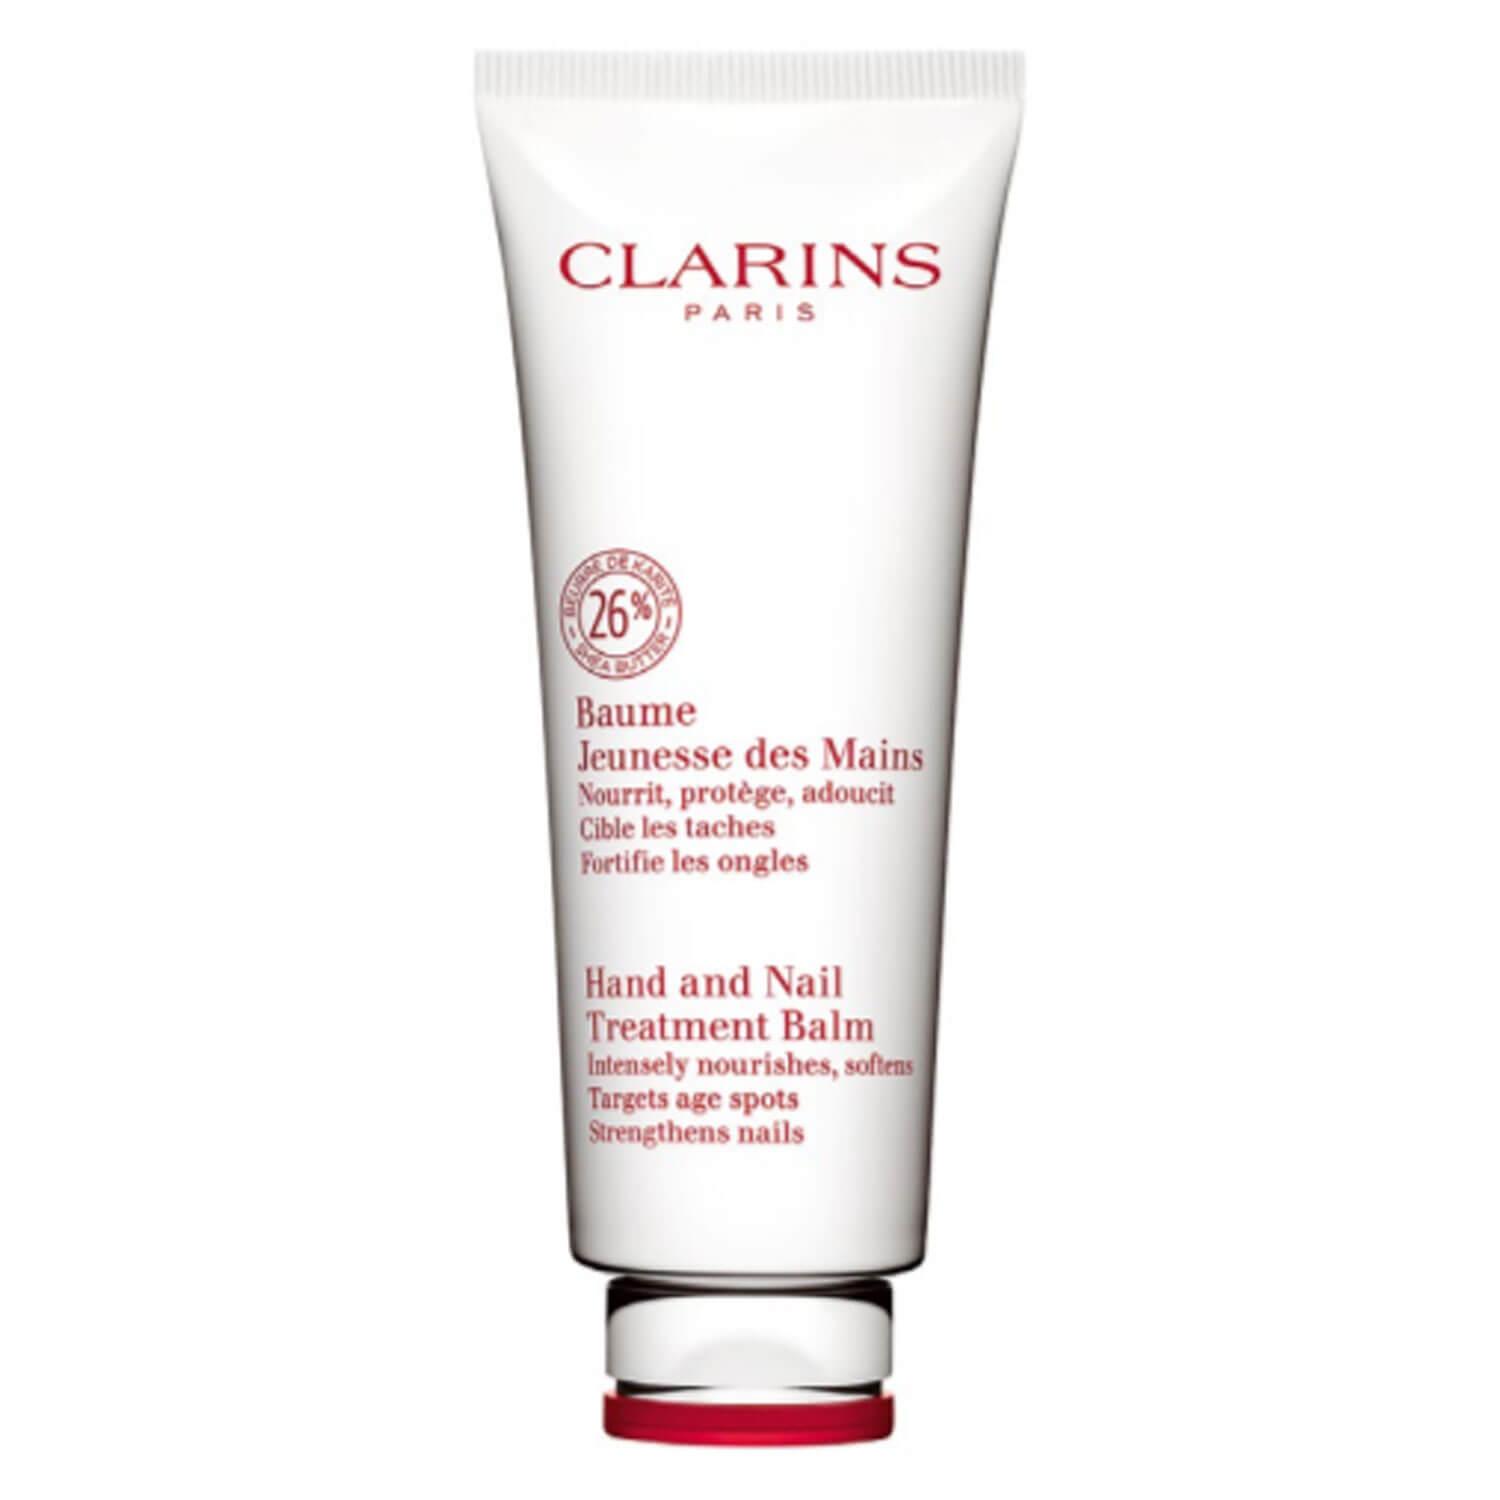 Clarins Body - Hand and Nail Treatment Balm